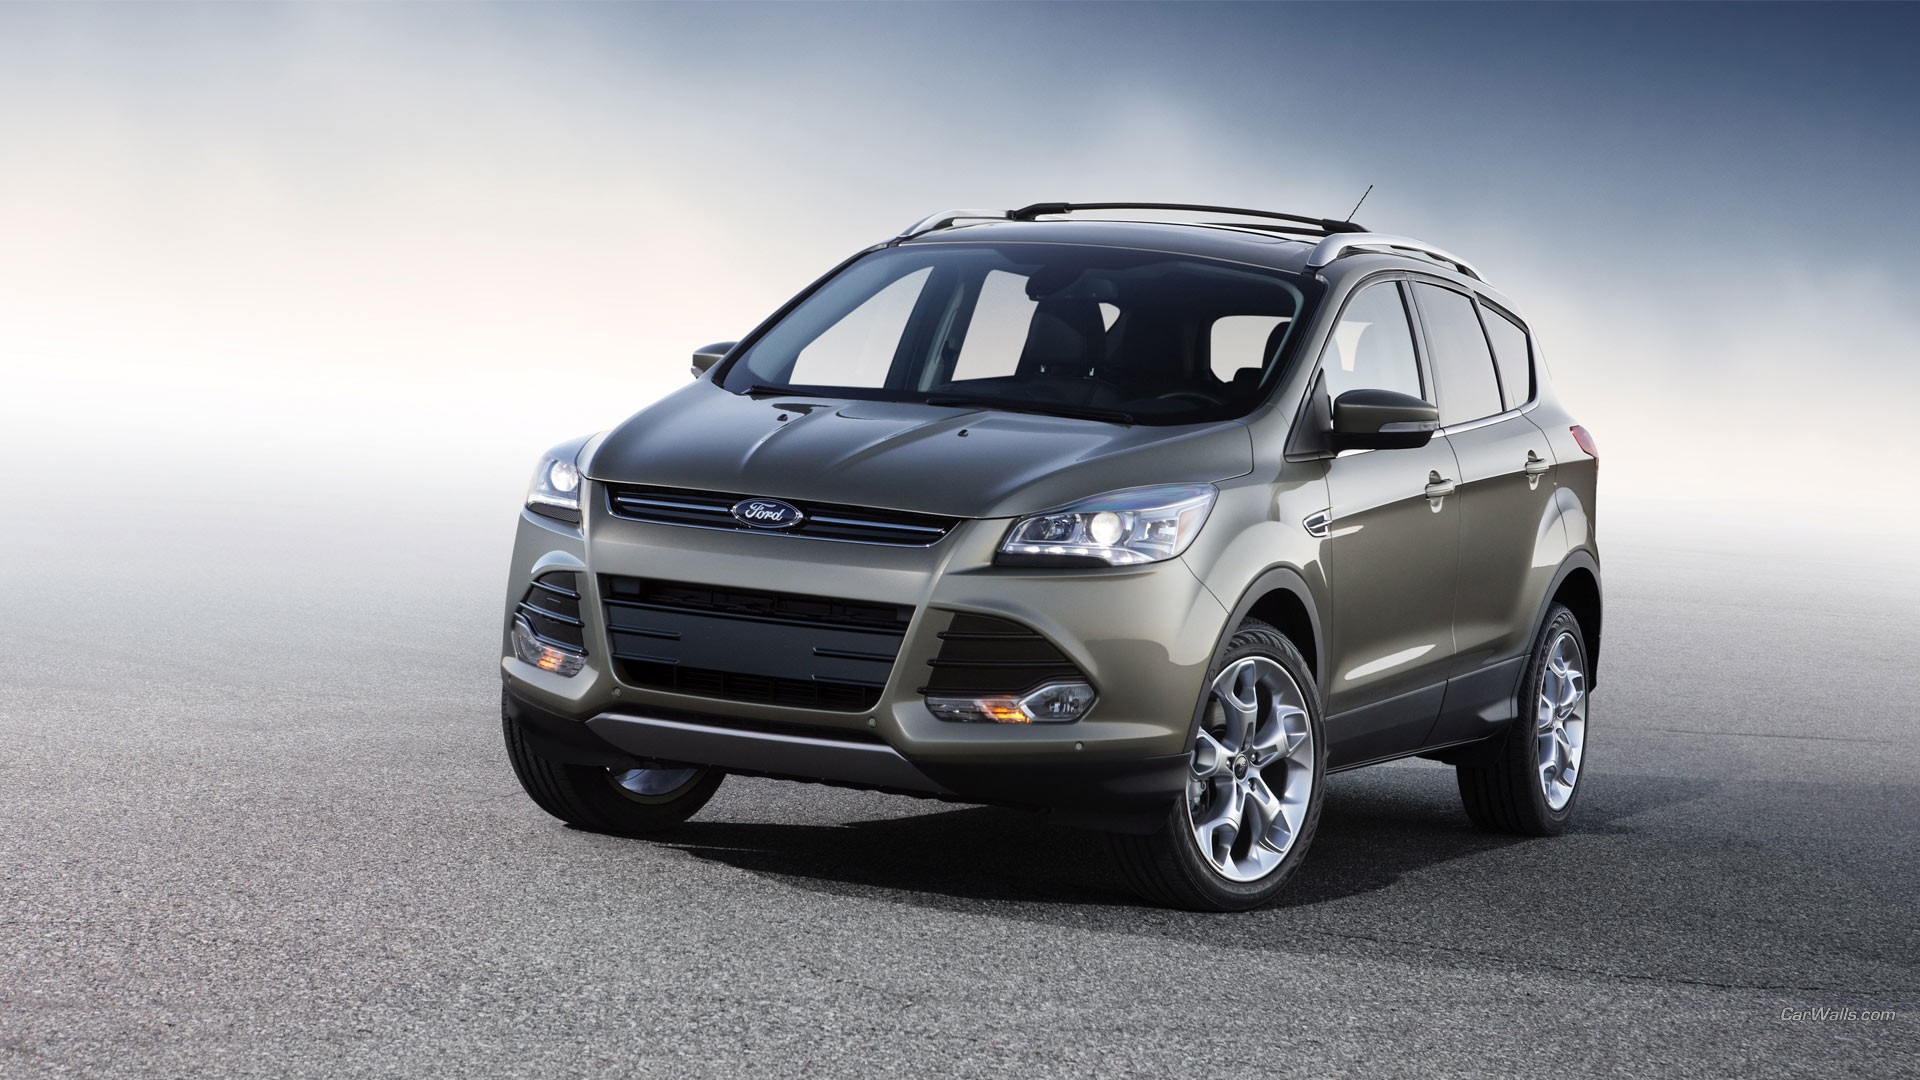 General 1920x1080 Ford Escape frontal view SUV Ford green cars vehicle American cars car